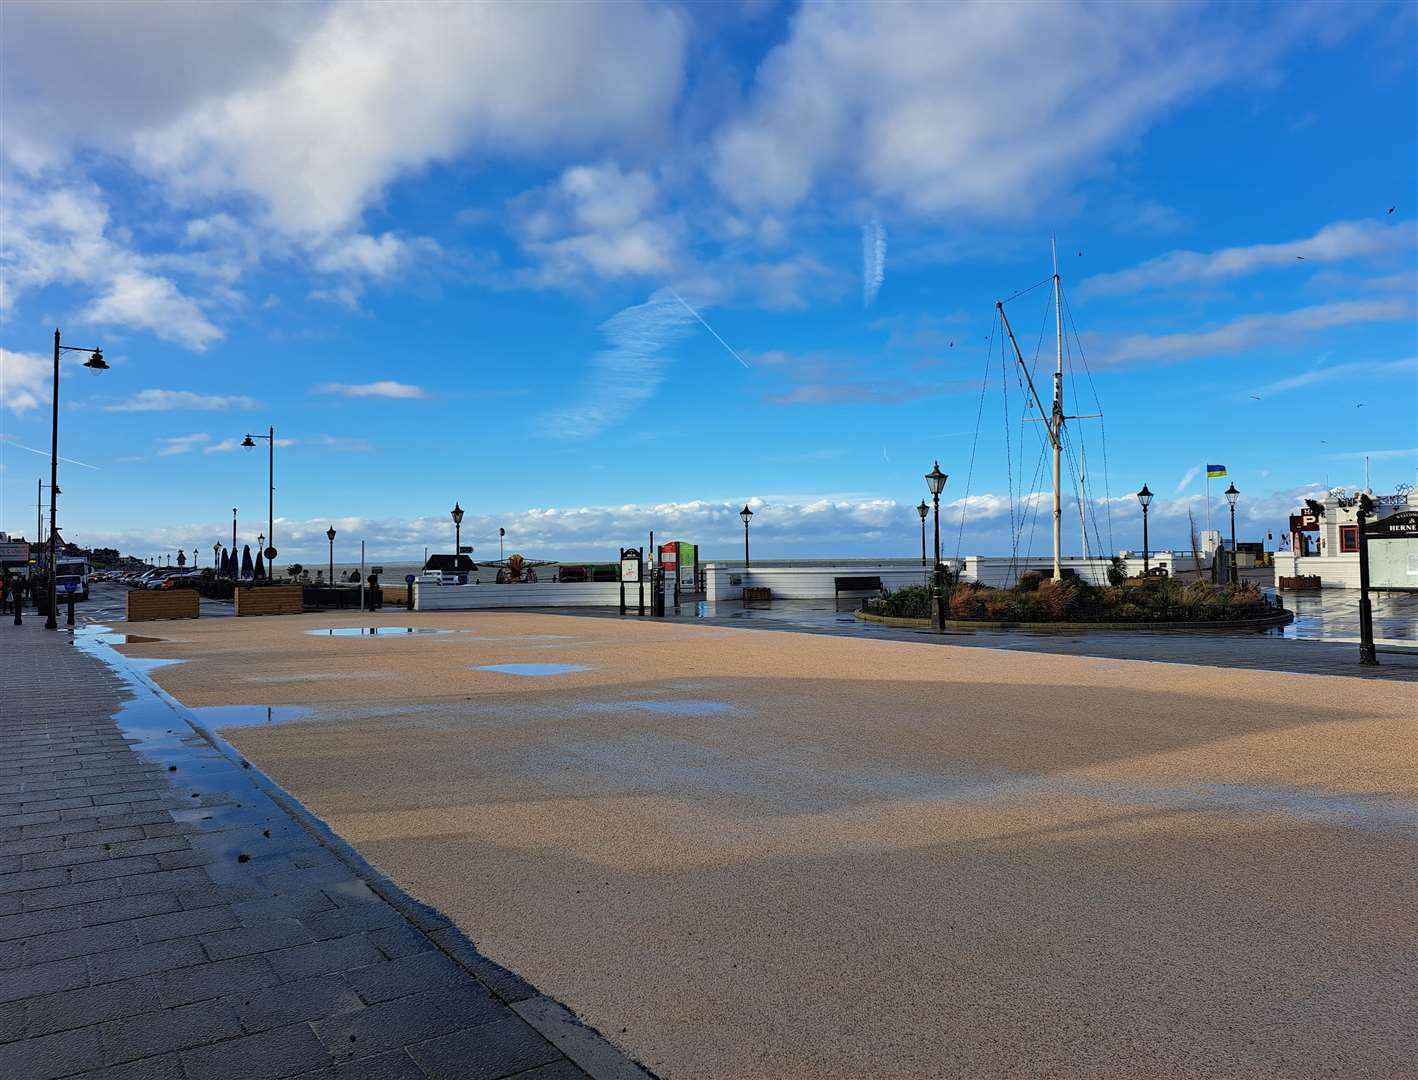 The newly installed plaza has resulted in the permanent closure of a section of Central Parade, Herne Bay